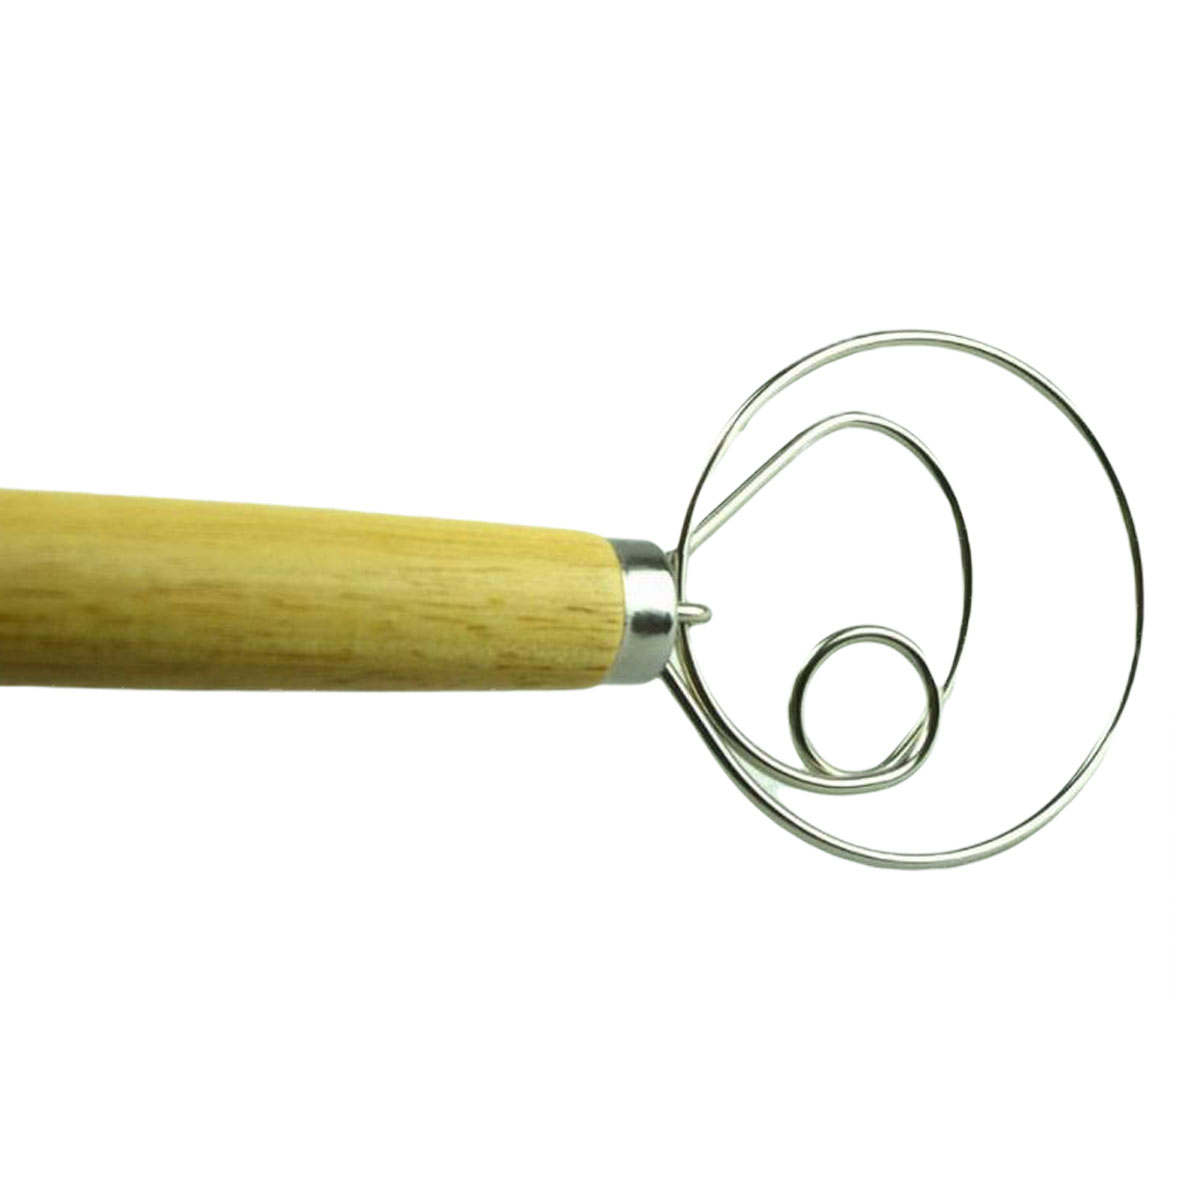 Bestine Danish Dough Whisk Bread Mixer Stainless Steel Dutch Whisk Dough Hand Mixer Wooden Handle Bread Making Supplies Kitchen Baking Tools for Homemade Bread Pancakes Biscuits